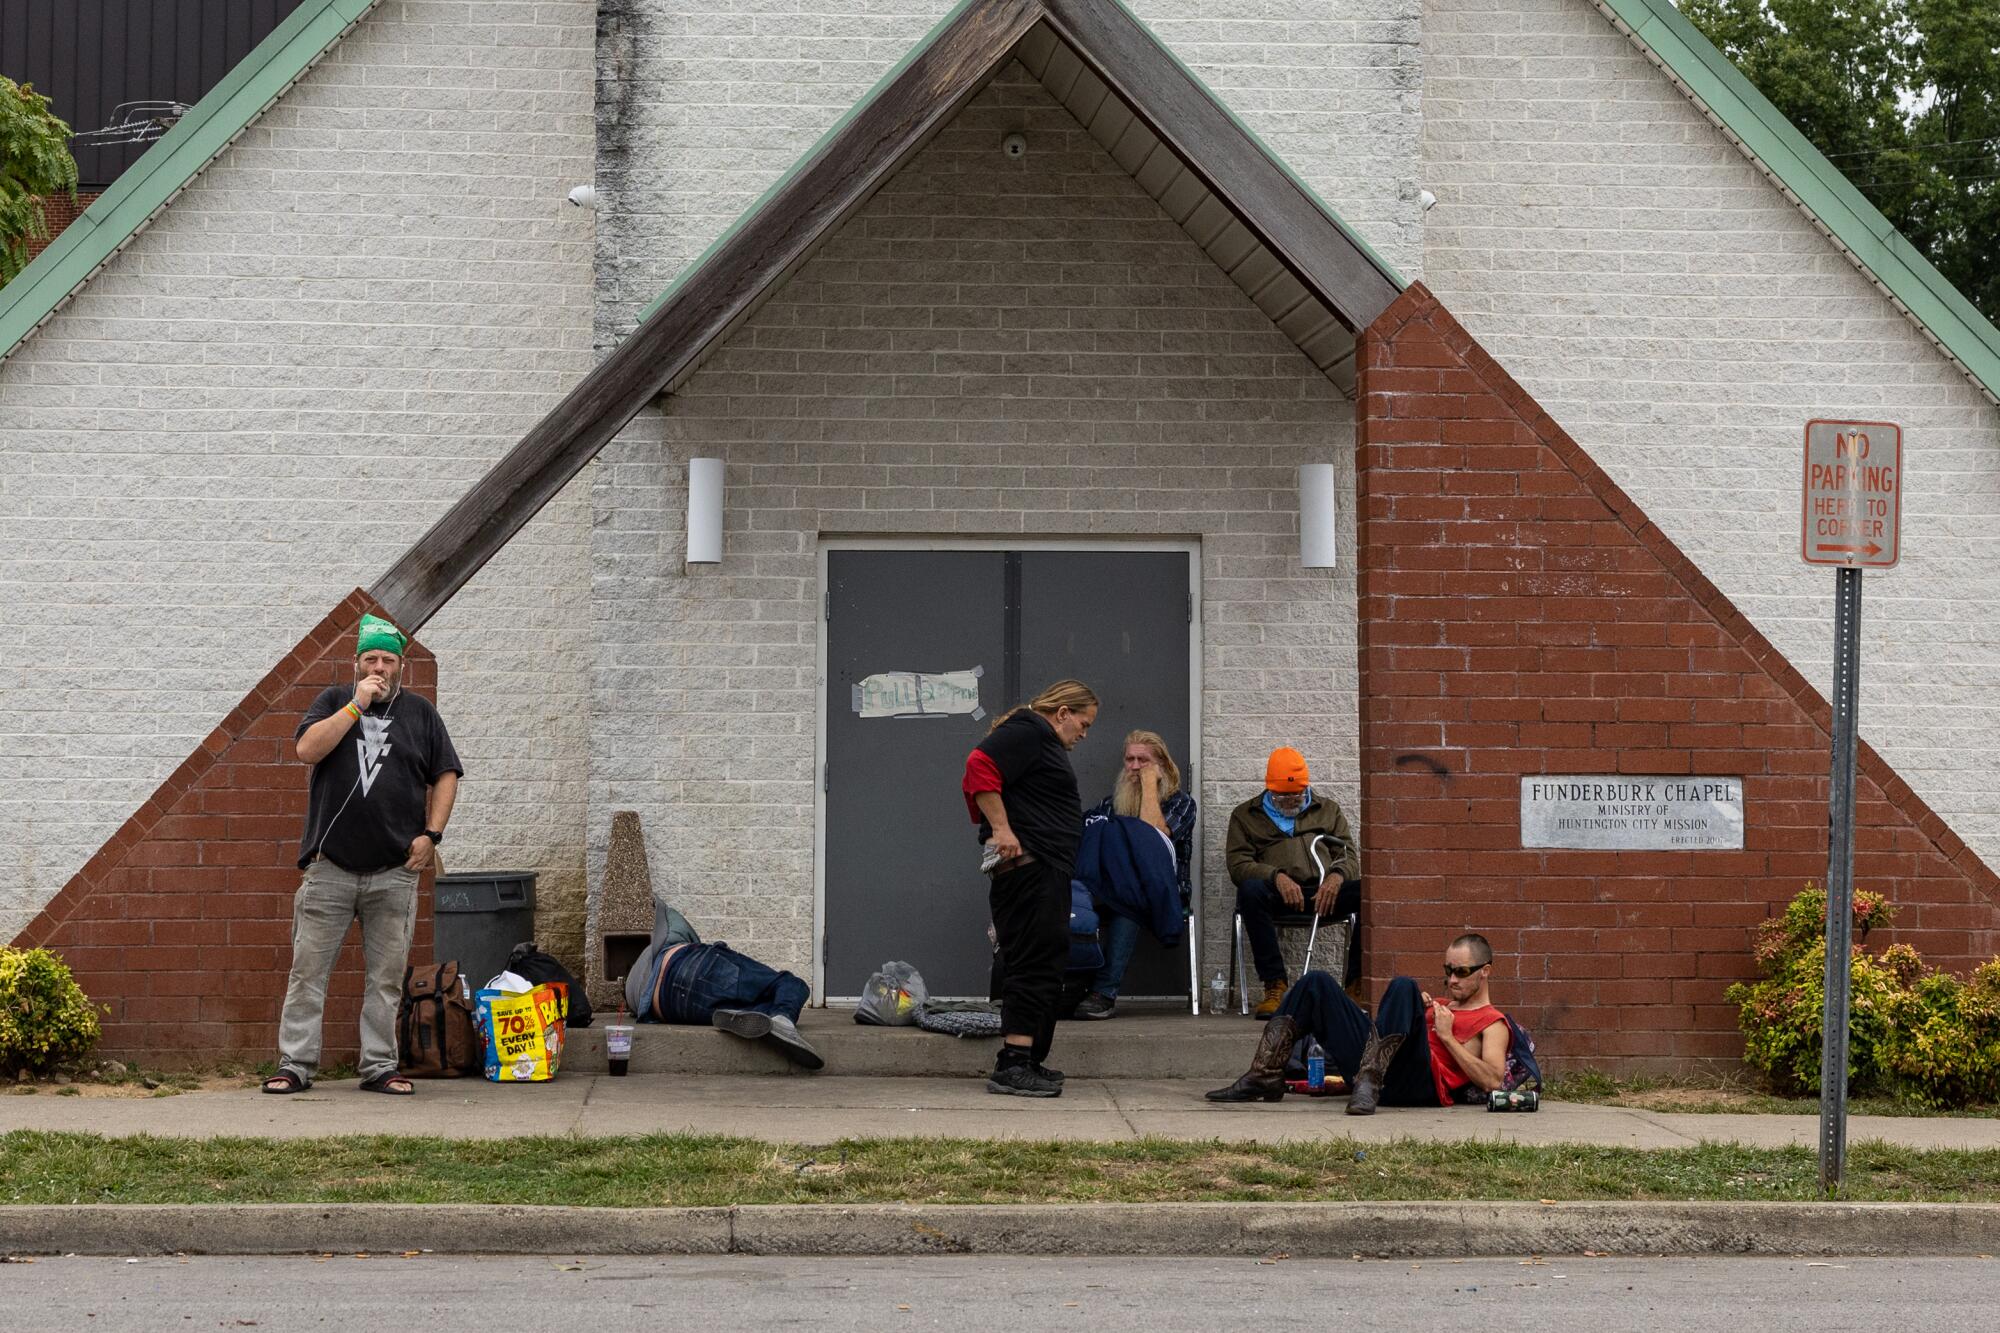 People who are unhoused hang outside the Huntington City Mission's chapel.